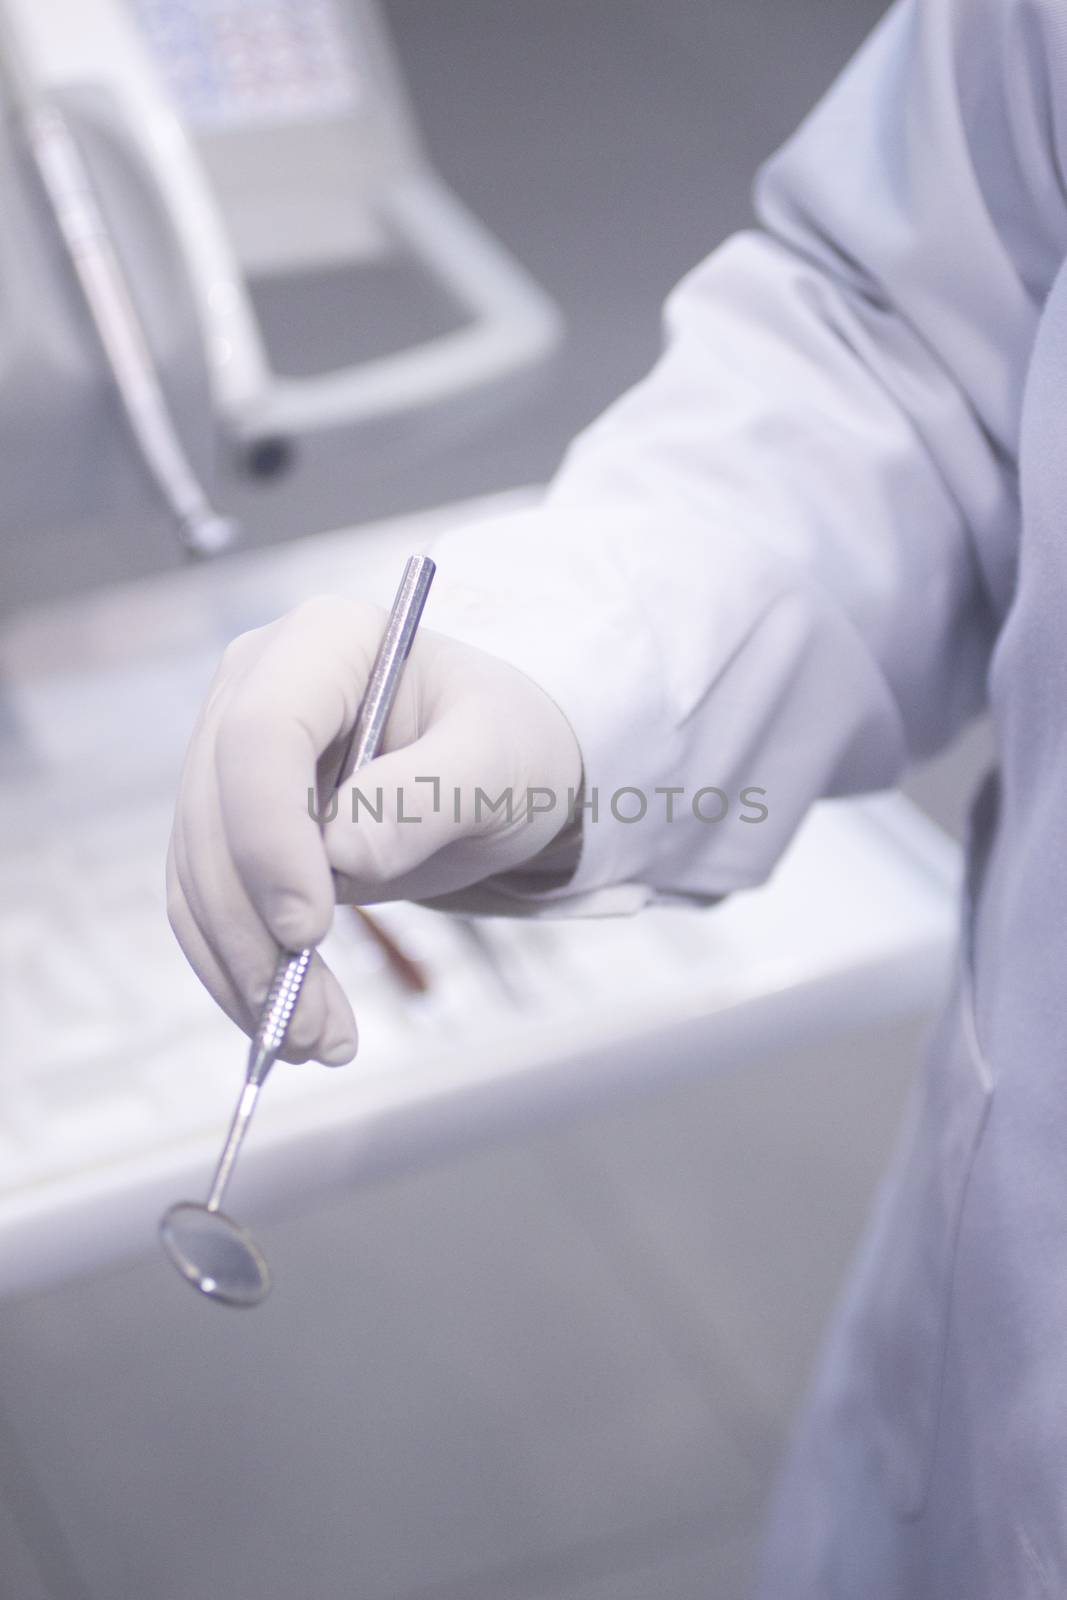 Dental instrumentation dentist drill tooth dental cleaning tool in the hand of dentist in dentists surgery clinic artistic color photo with low depth of focus.